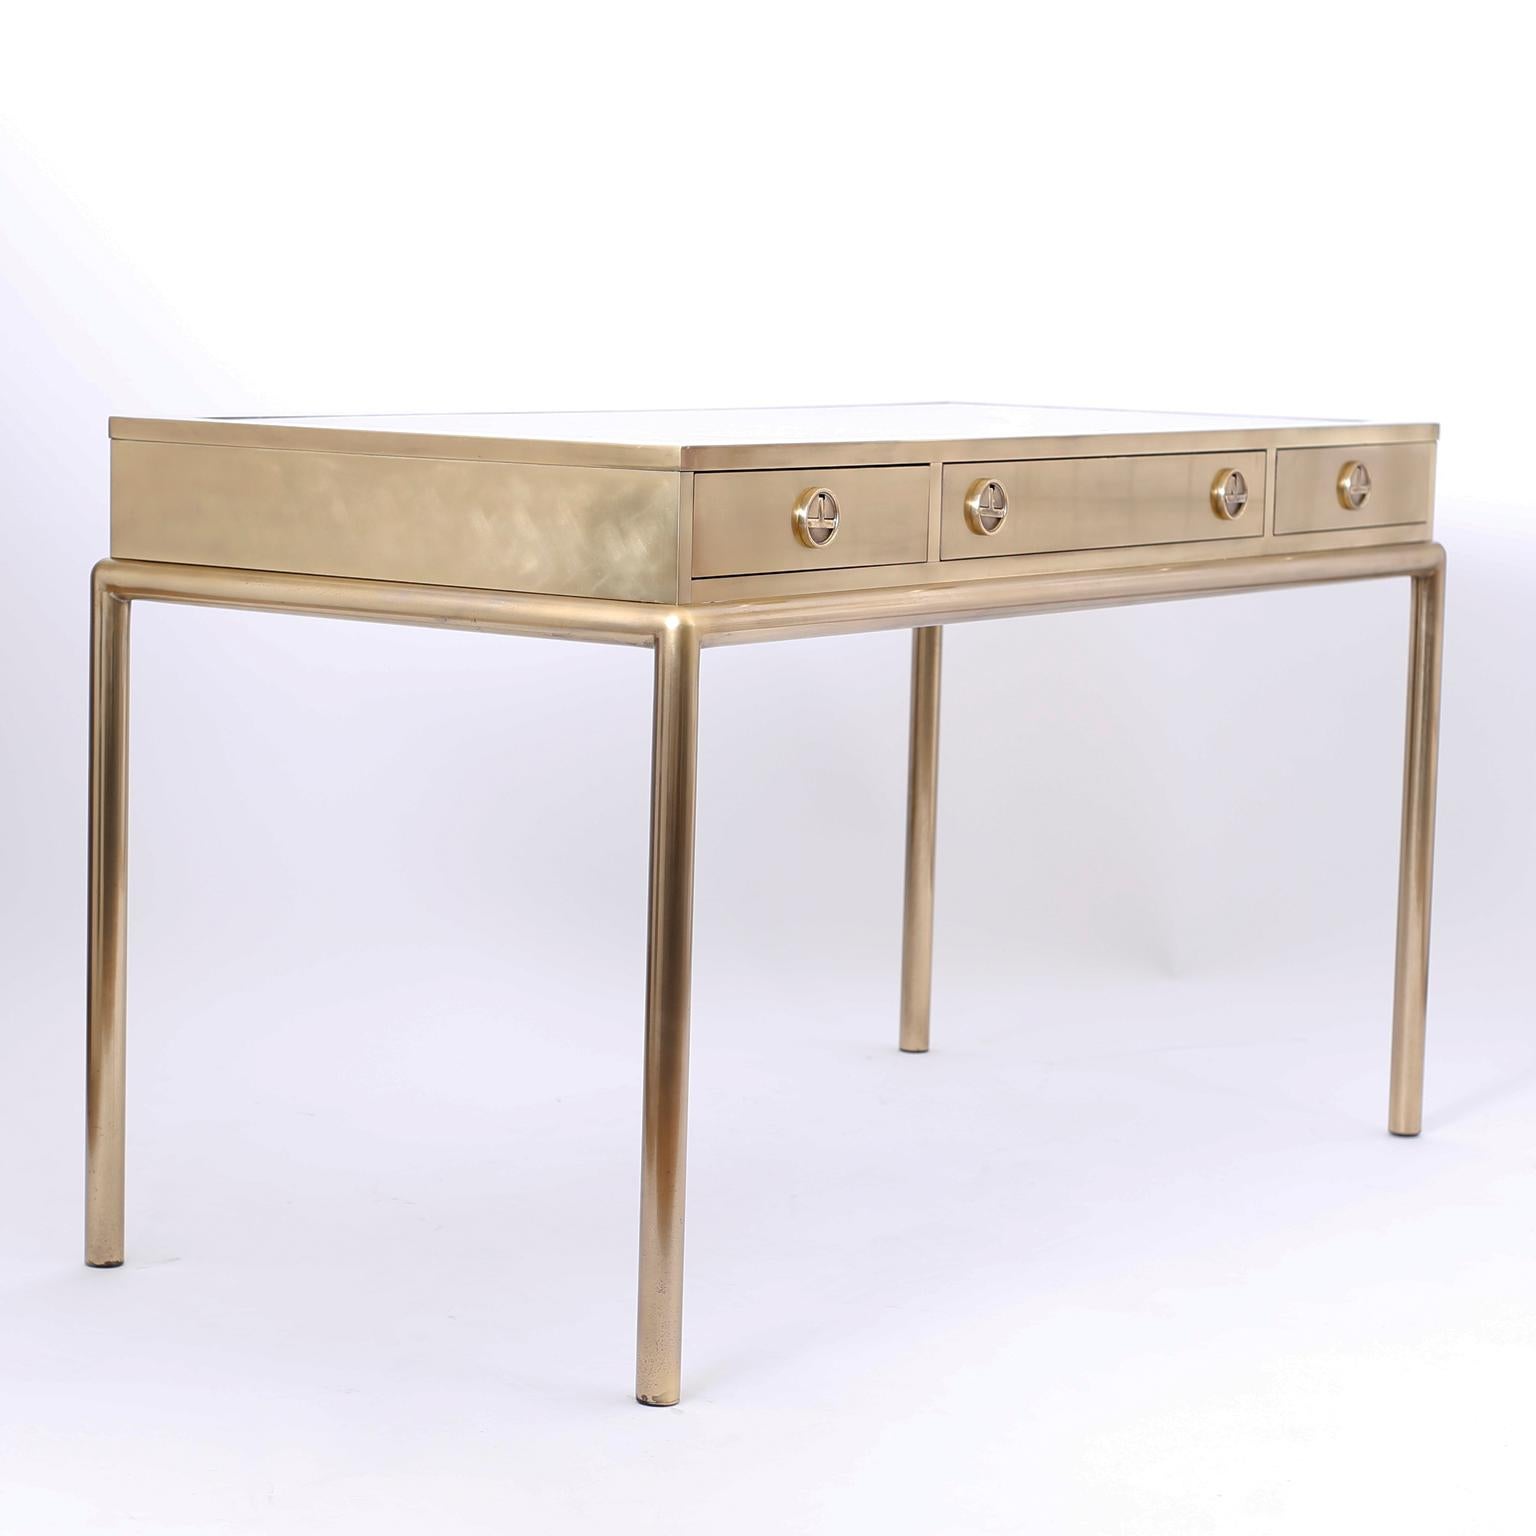 Campaign Brass and Leather Mastercraft Desk